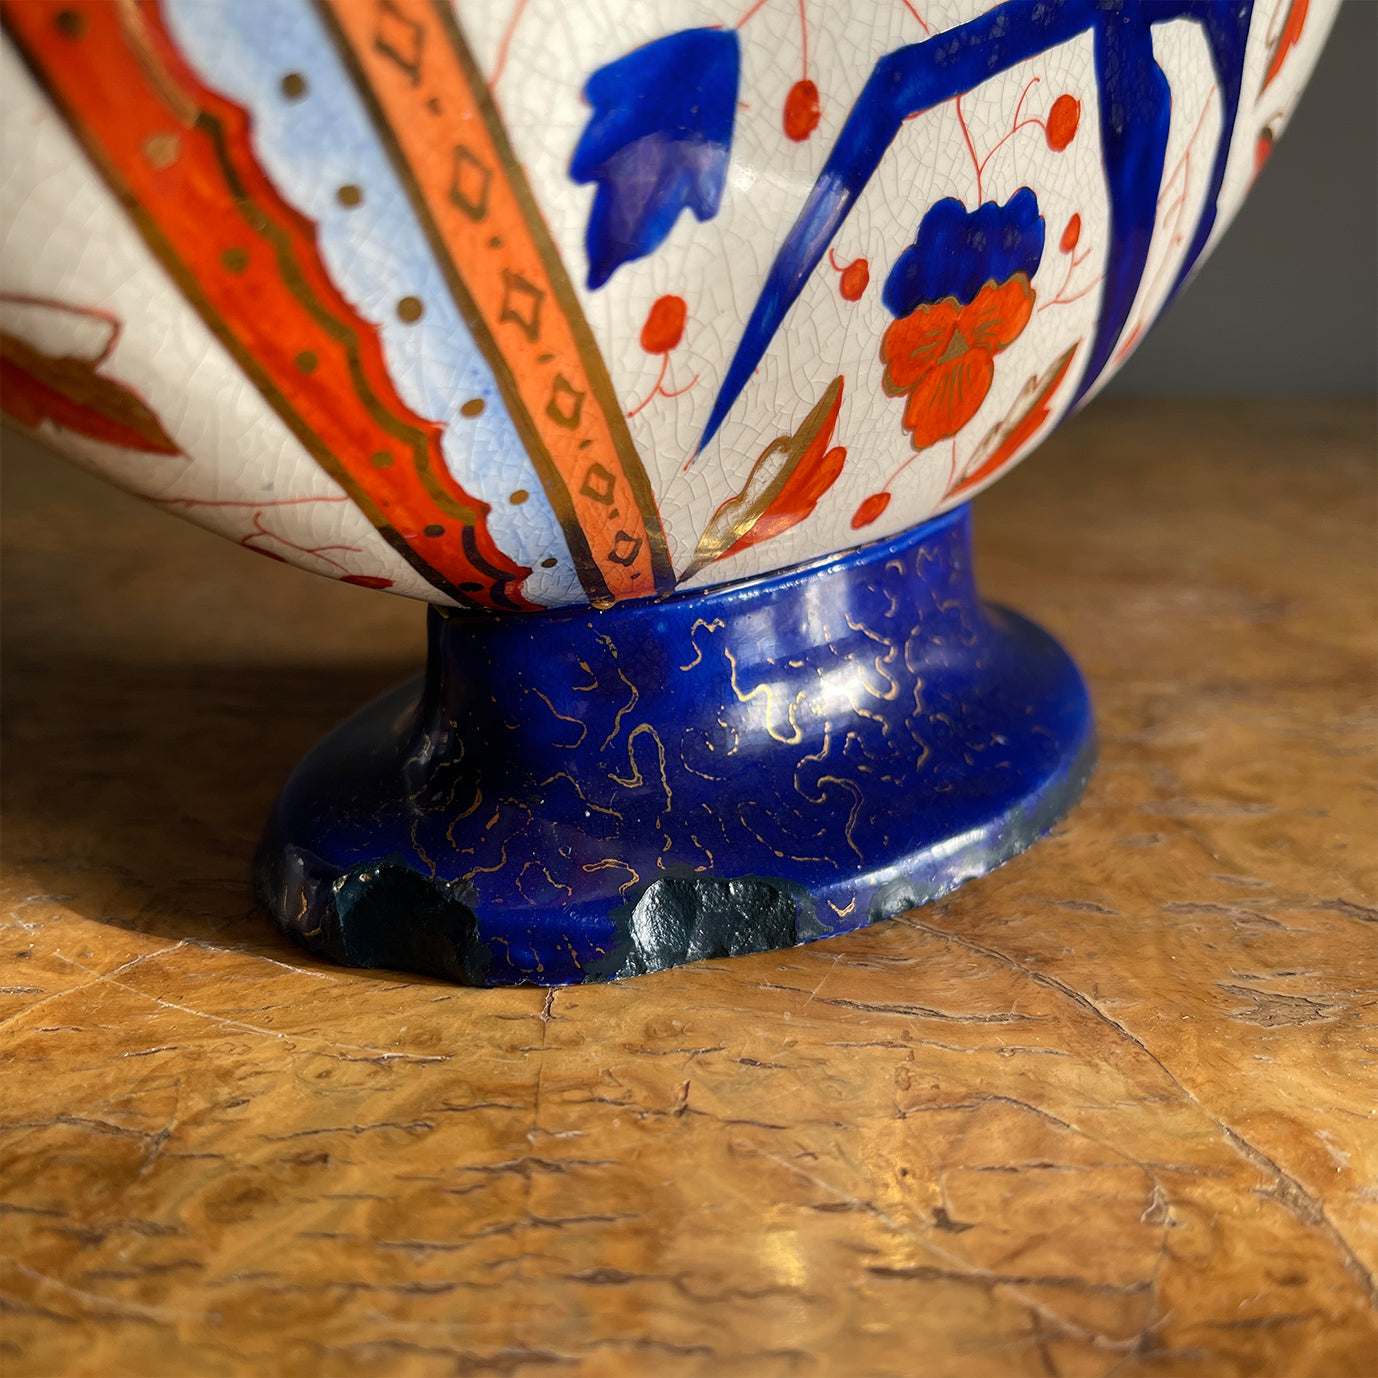 An Imari Moon Vase with a hand painted butterfly design. Beautiful blue and red designs to both sides. Decorative blue zig zag styled handles come down each of the sides. A striking decorative piece that would bring a splash of colour to any space - SHOP NOW - www.intovintage.co.uk